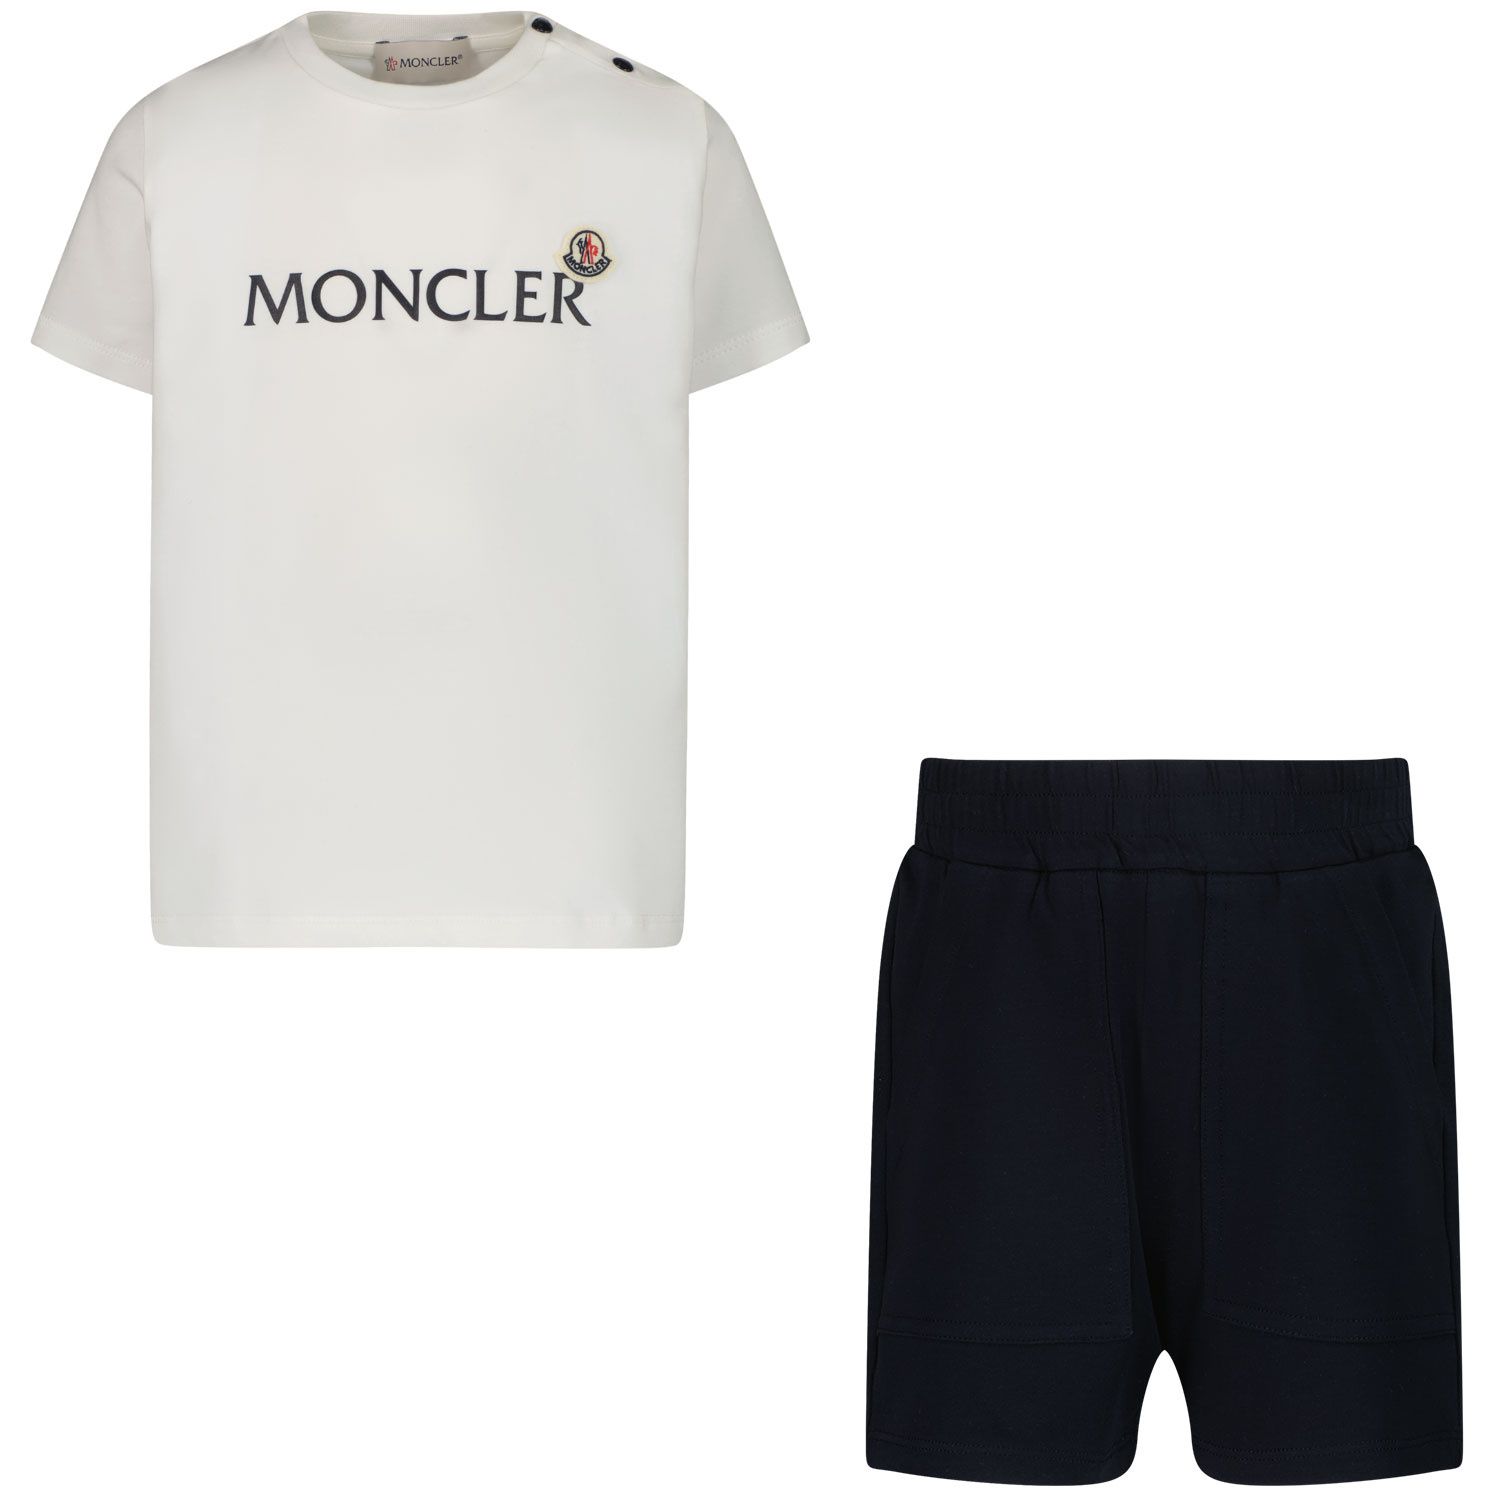 Picture of Moncler 8M00024 baby set white